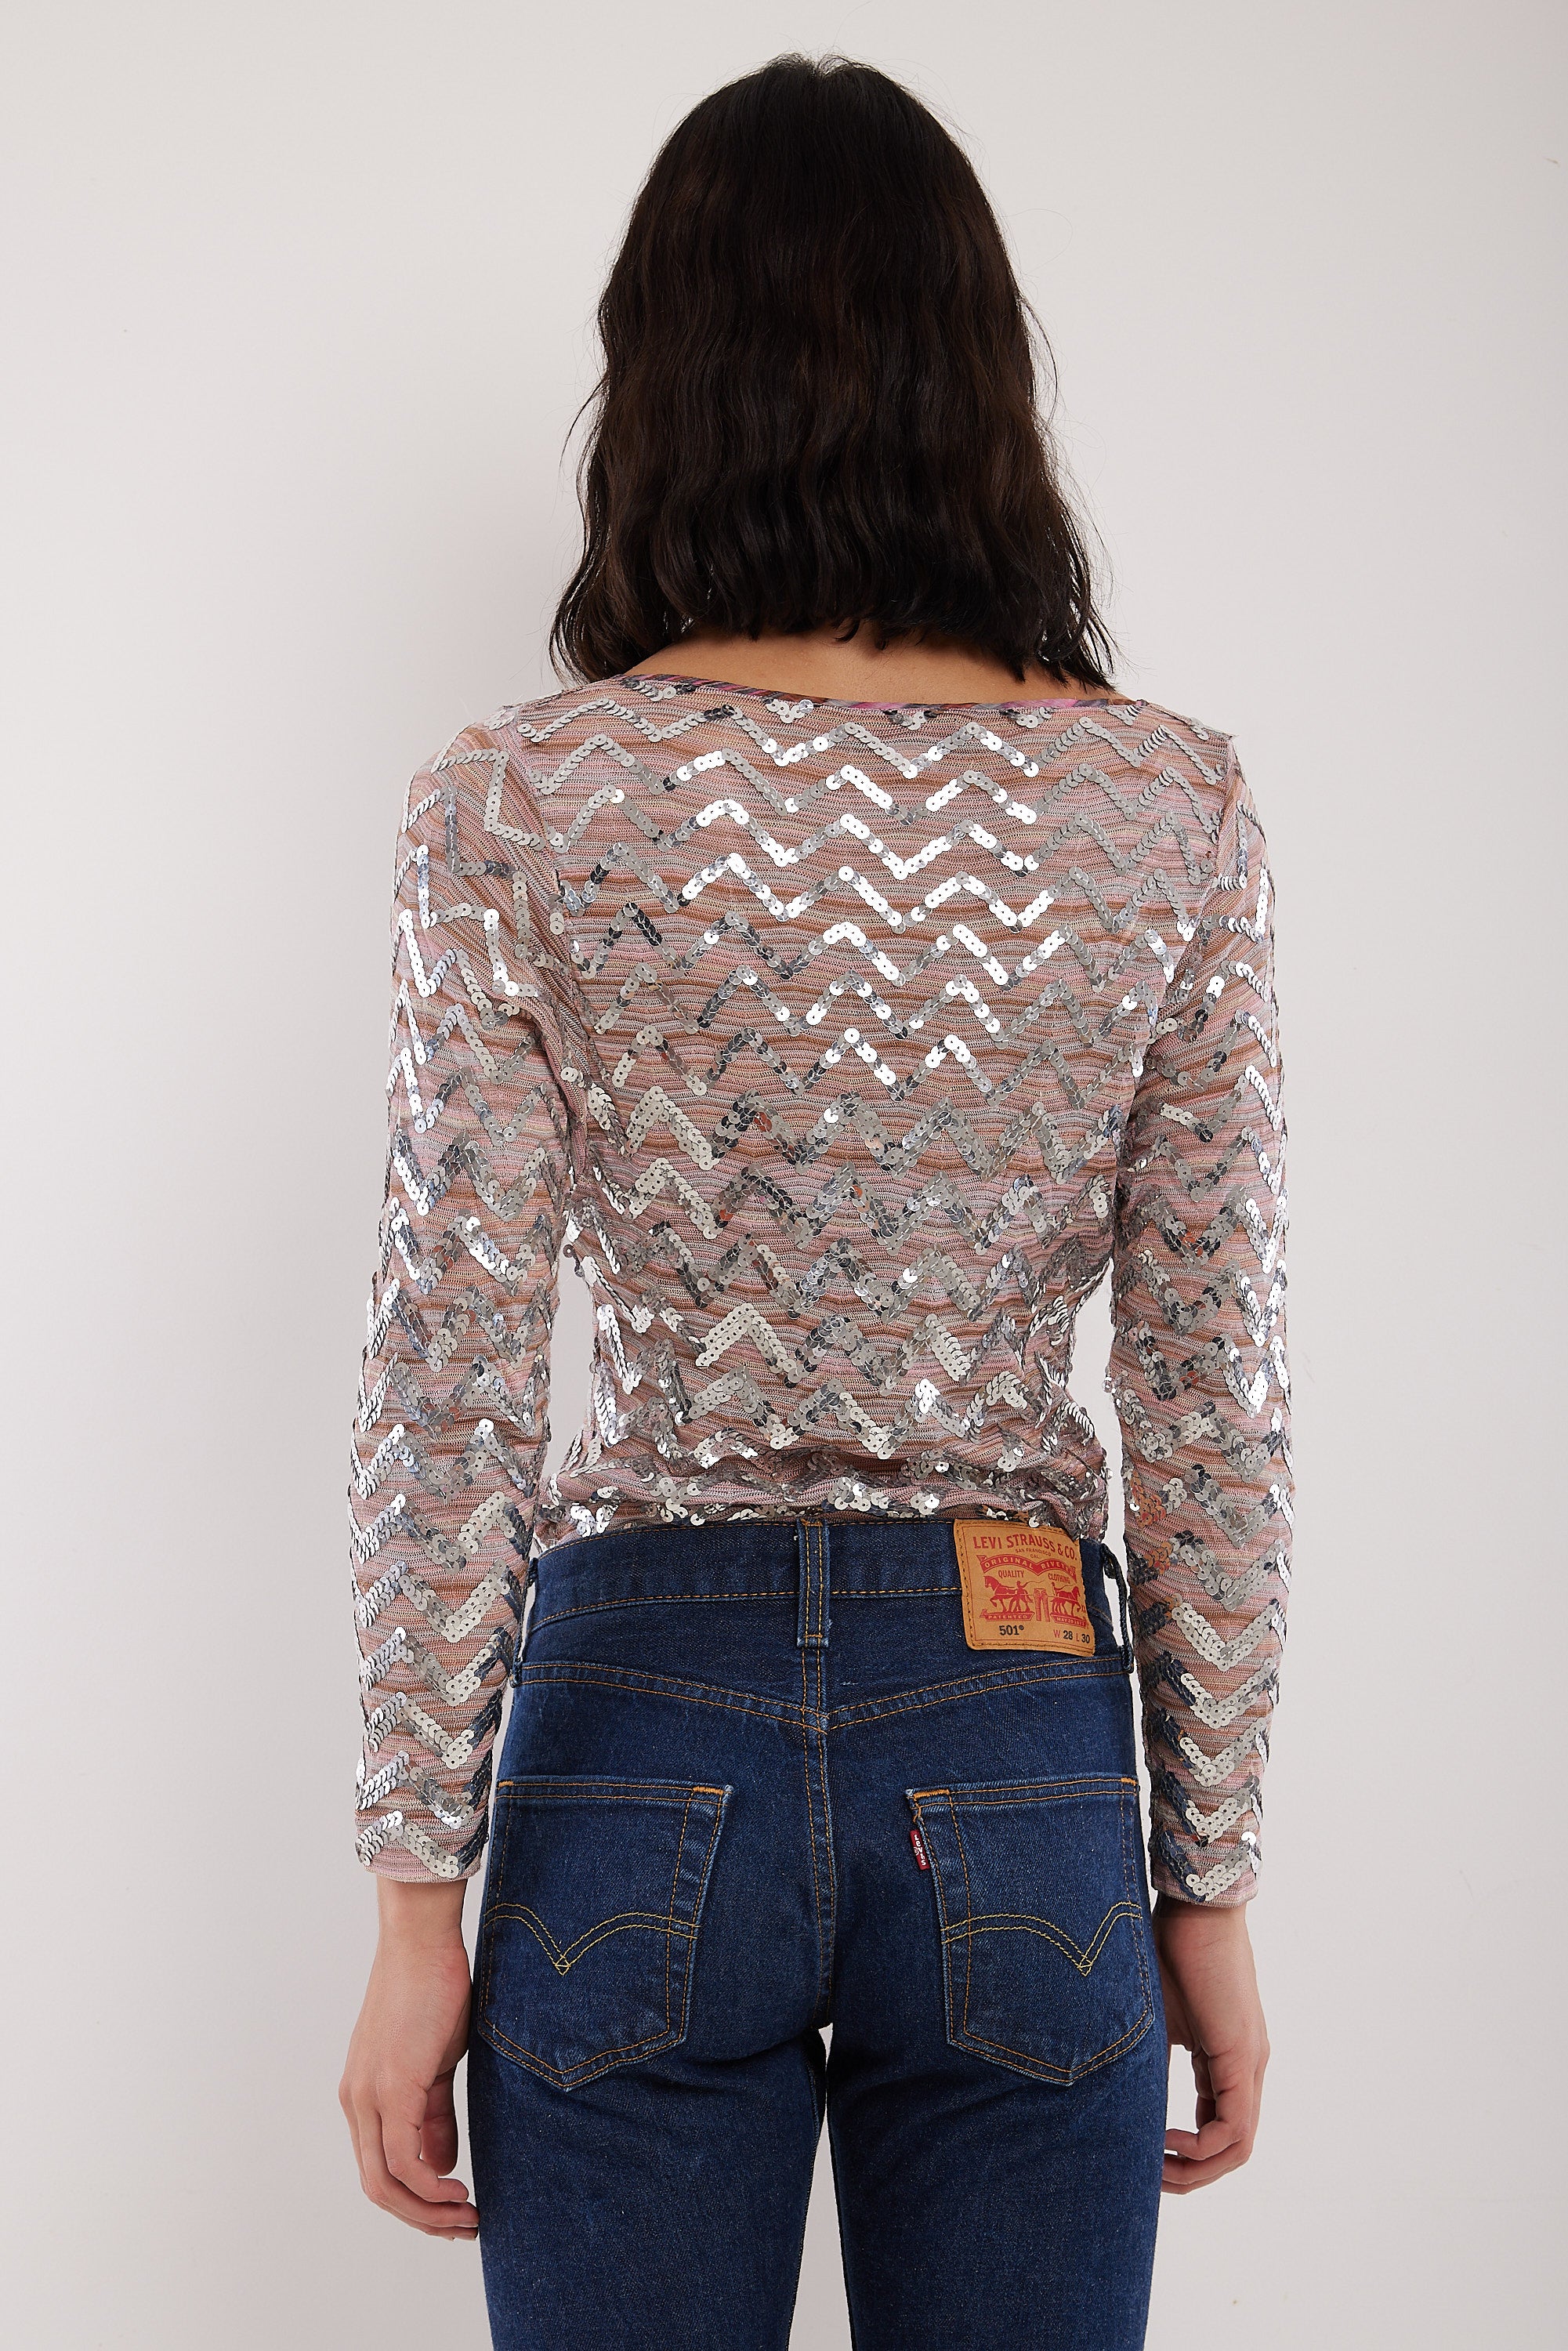 Missoni <br> S/S 2001 runway silver sequin keyhole top